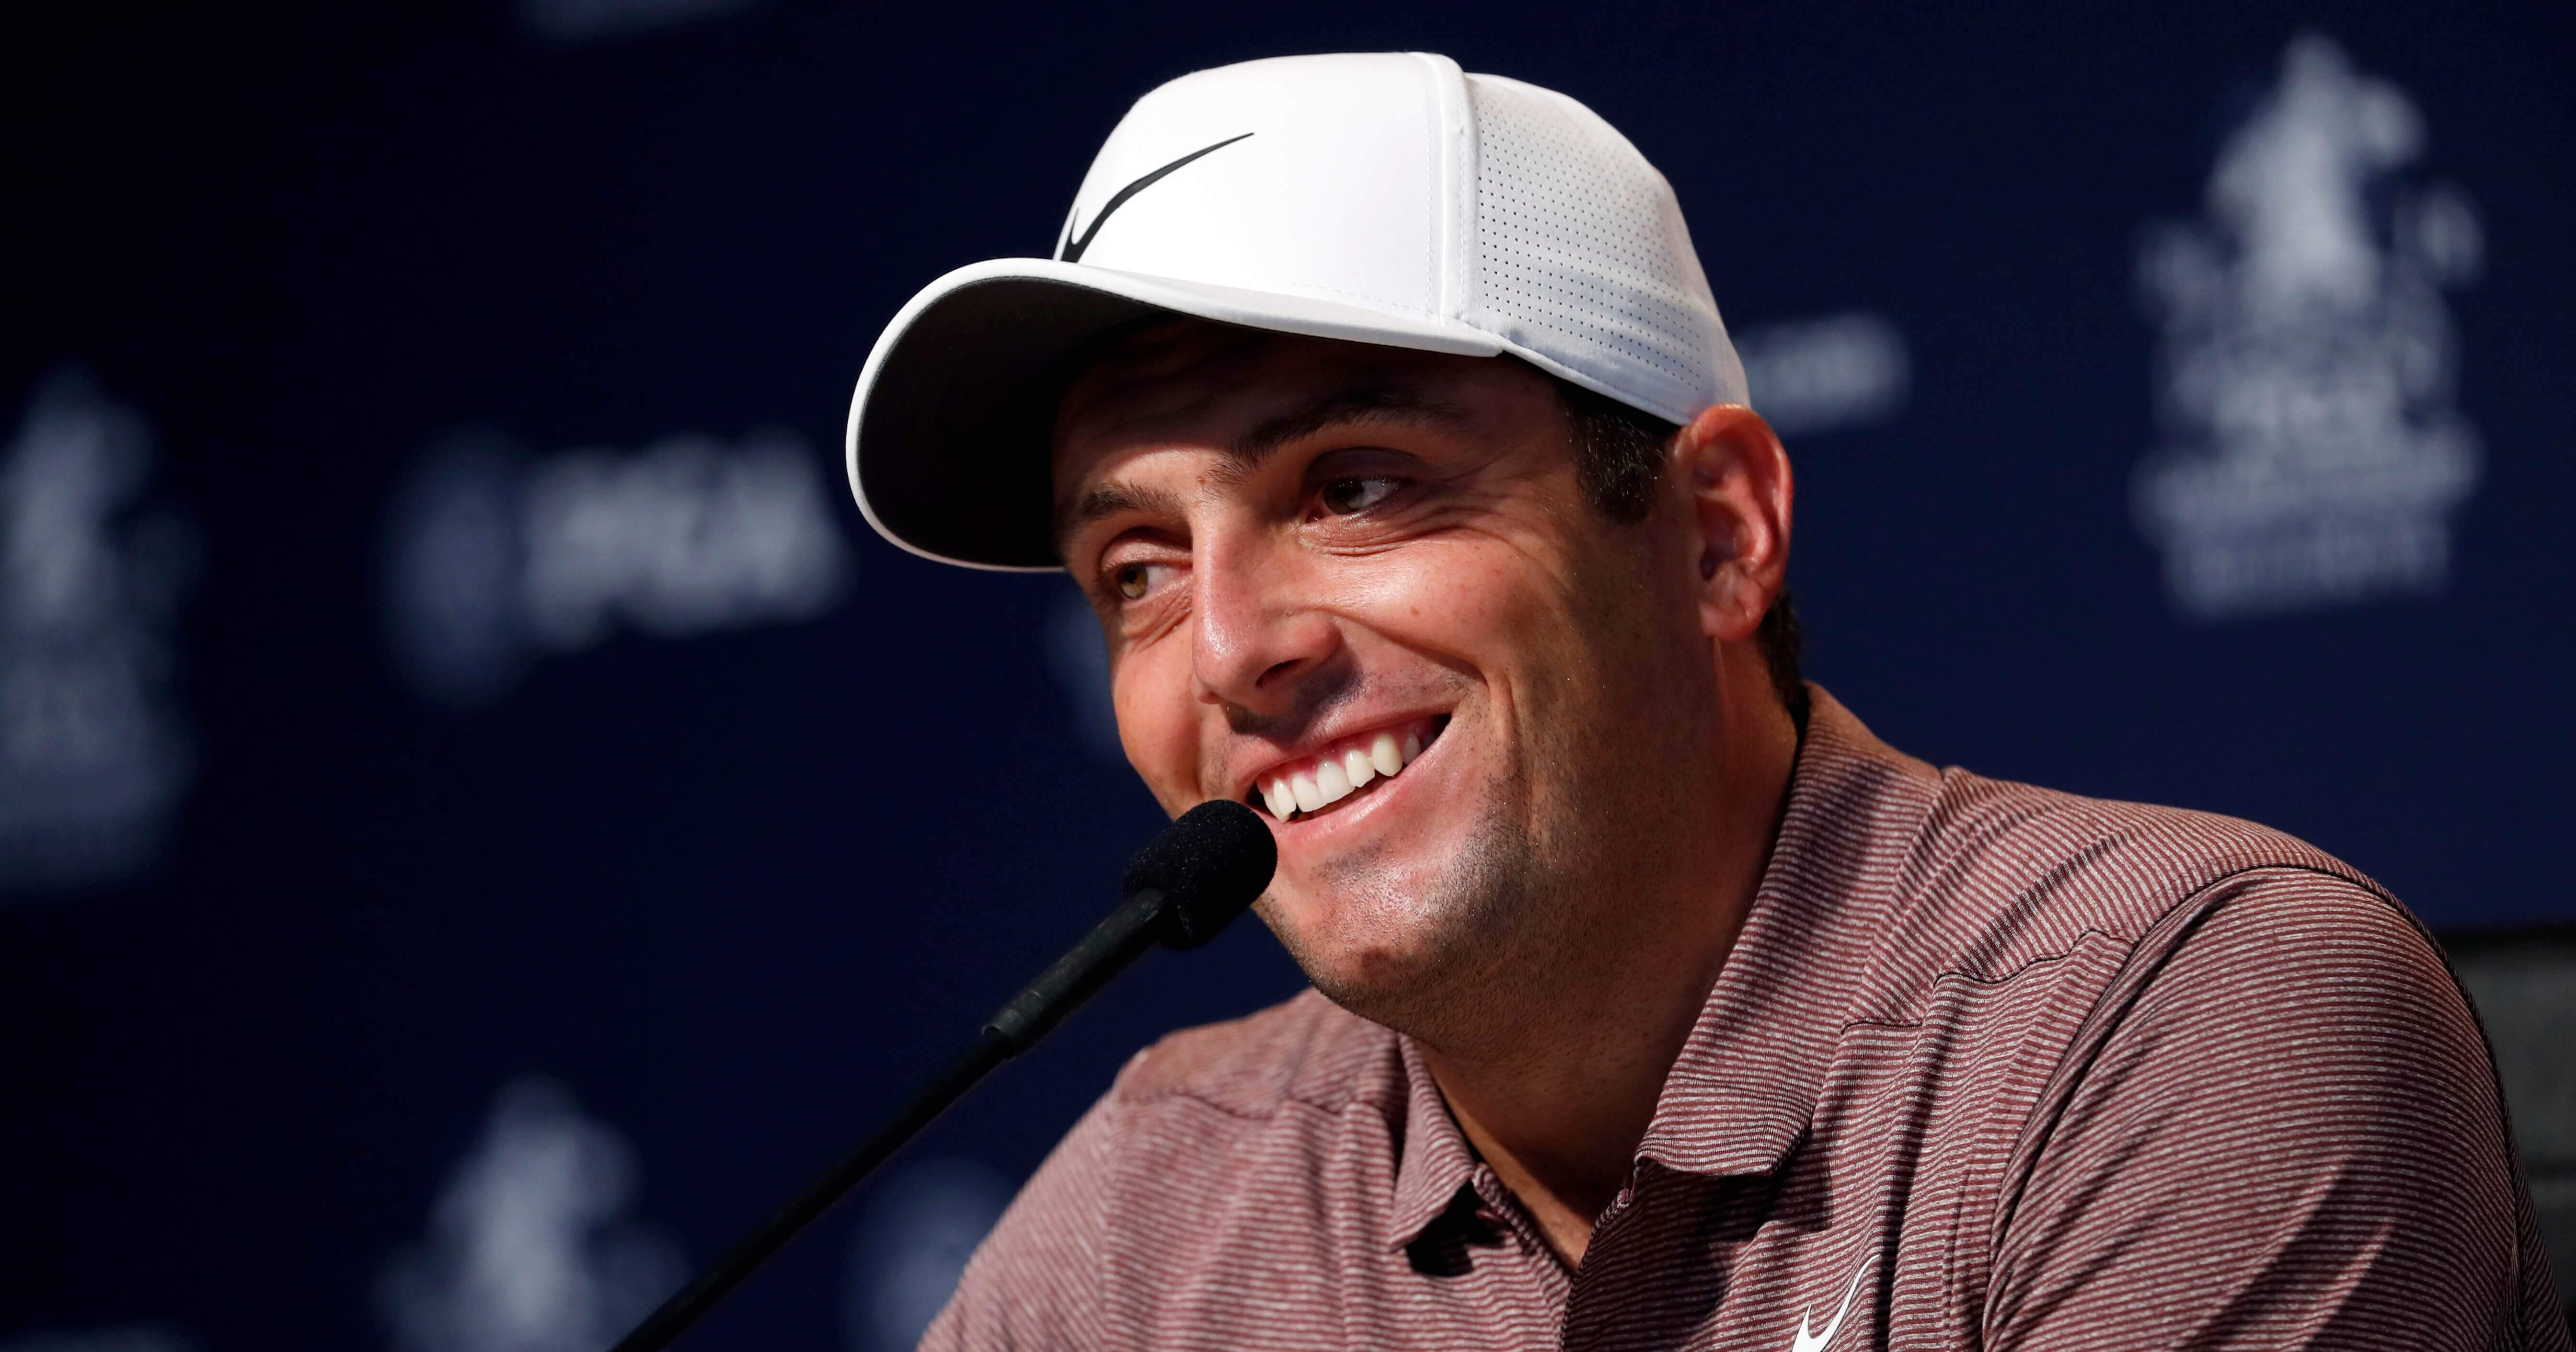 Francesco Molinari, of Italy, smiles as he listens to a question during a news conference at the PGA Championship golf tournament Tuesday, Aug. 7, 2018, at Bellerive Country Club in St. Louis.